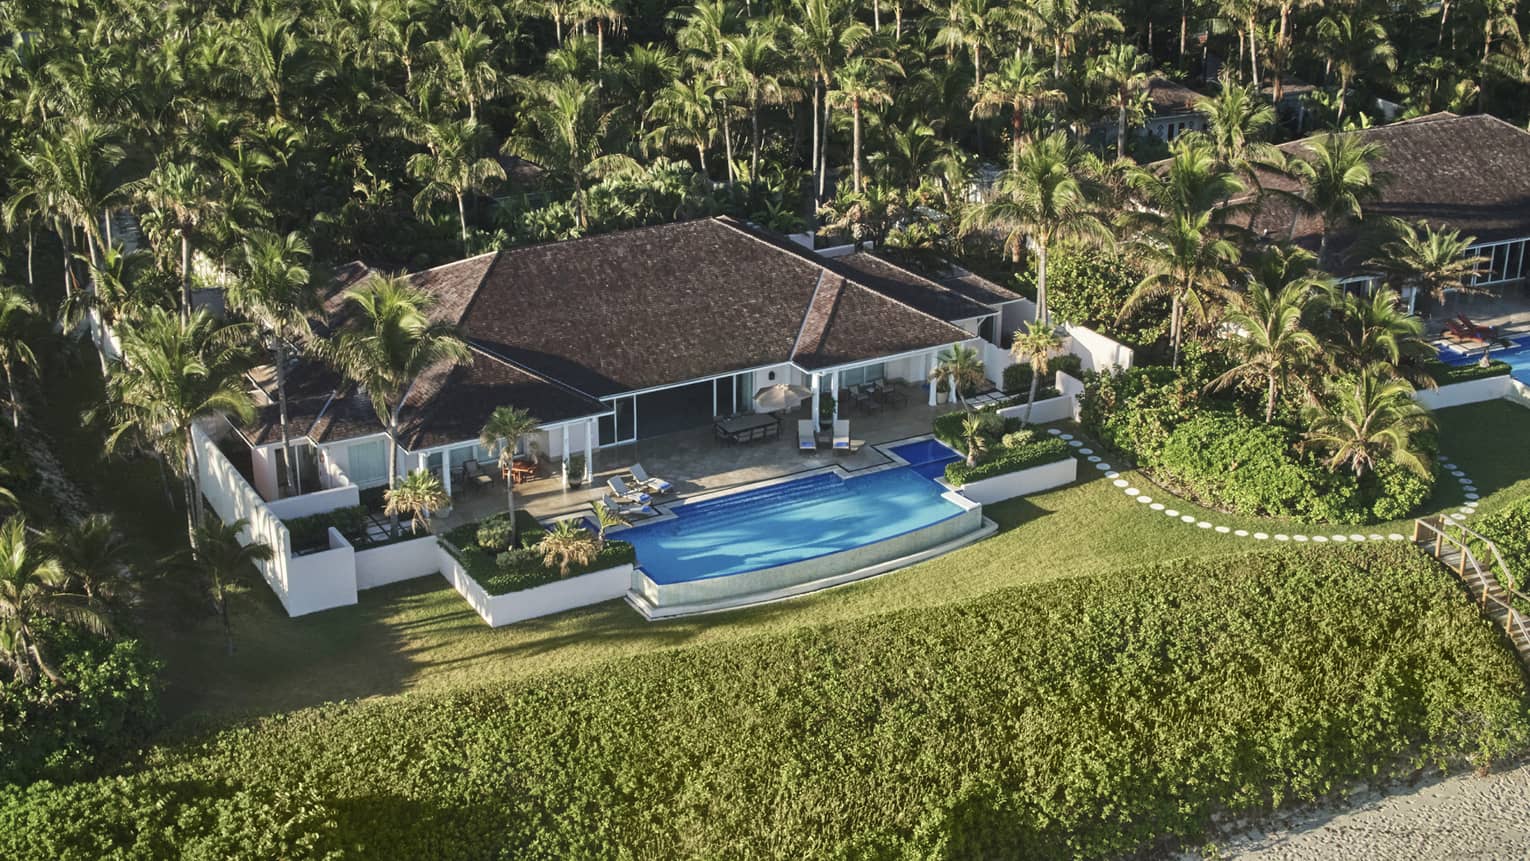 Aerial view of large Four Seasons Ocean Club villa bungalow, pool and lawns behind greenery, sand beach